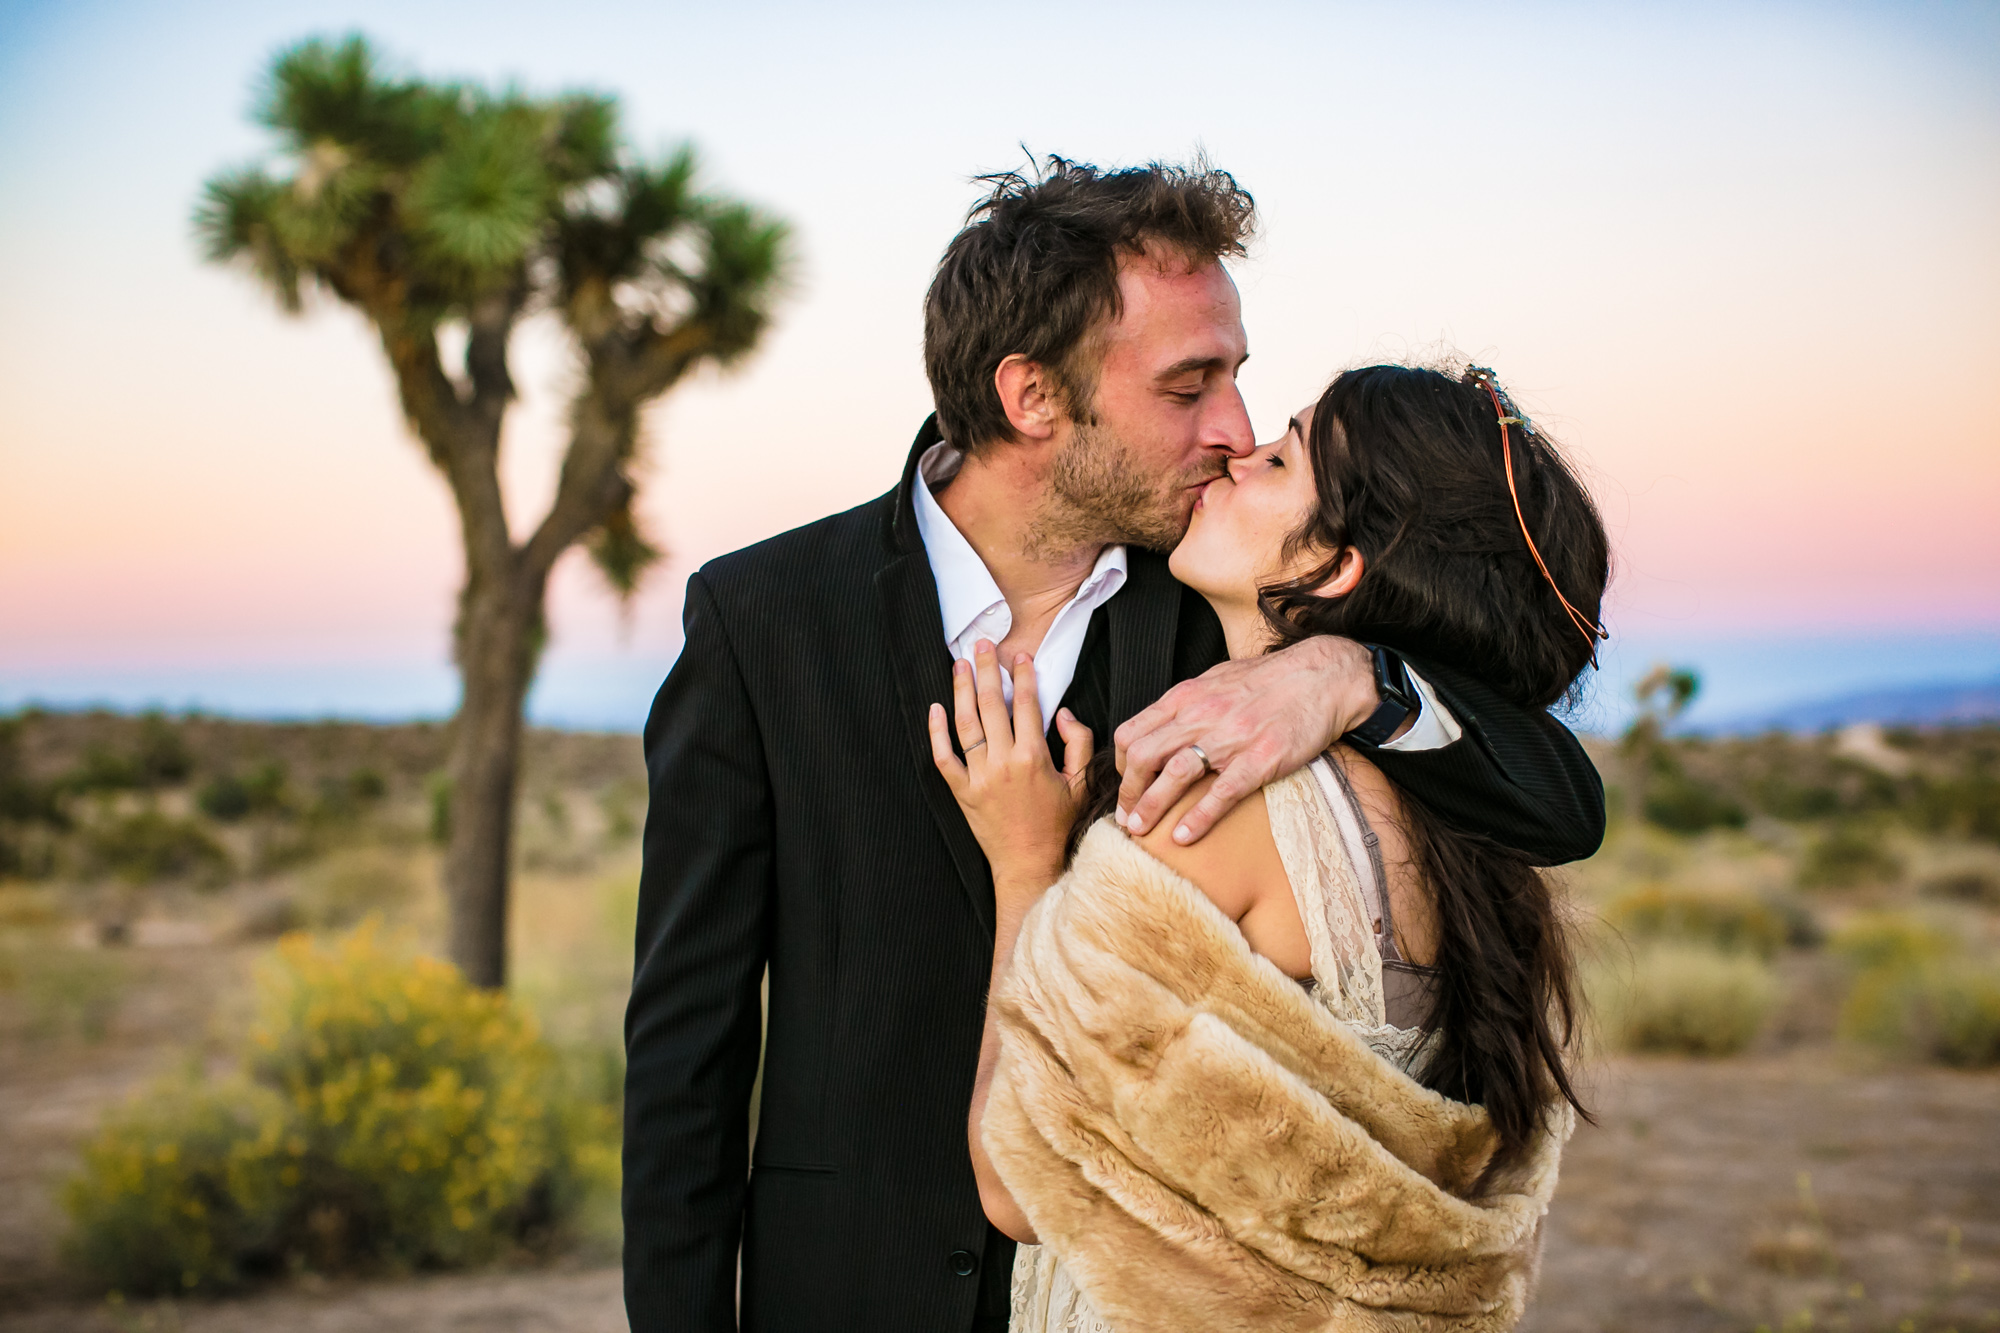 Elopement at sunset in front of a Joshua Tree.